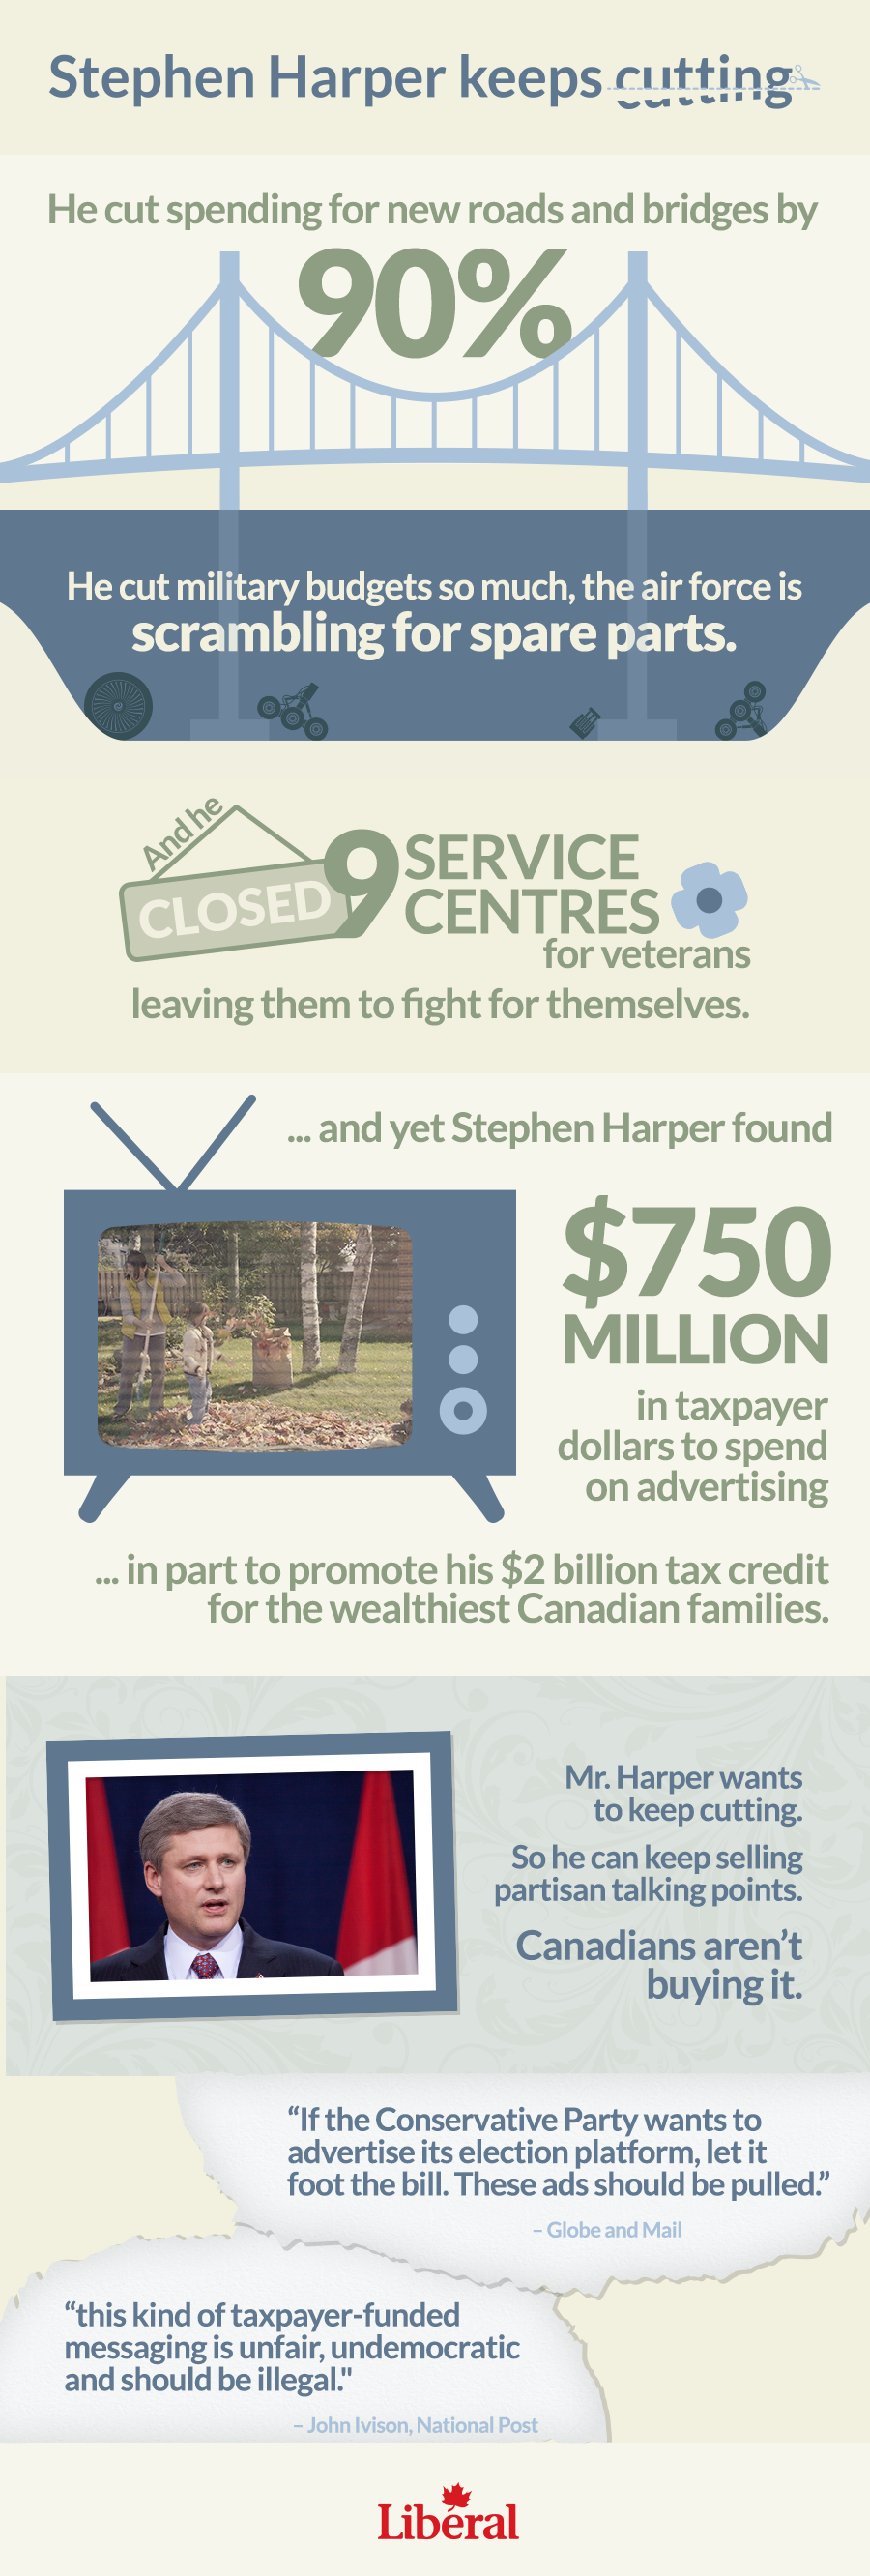 Stephen Harper keeps cutting. He cut spending for new roads and bridges by 90%. He cut military budgets so much, the air force is scrambling for spare parts. And he closed 9 service centres for veterans leaving them to fight for themselves... and yet Stephen Harper found $750 million in taxpayer dollars to spend on advertising... and promoting his $2 billion tax credit for the wealthiest Canadian families. Mr. Harper wants to keep cutting. So he can keep selling partisan talking points. Canadians aren't buying it.